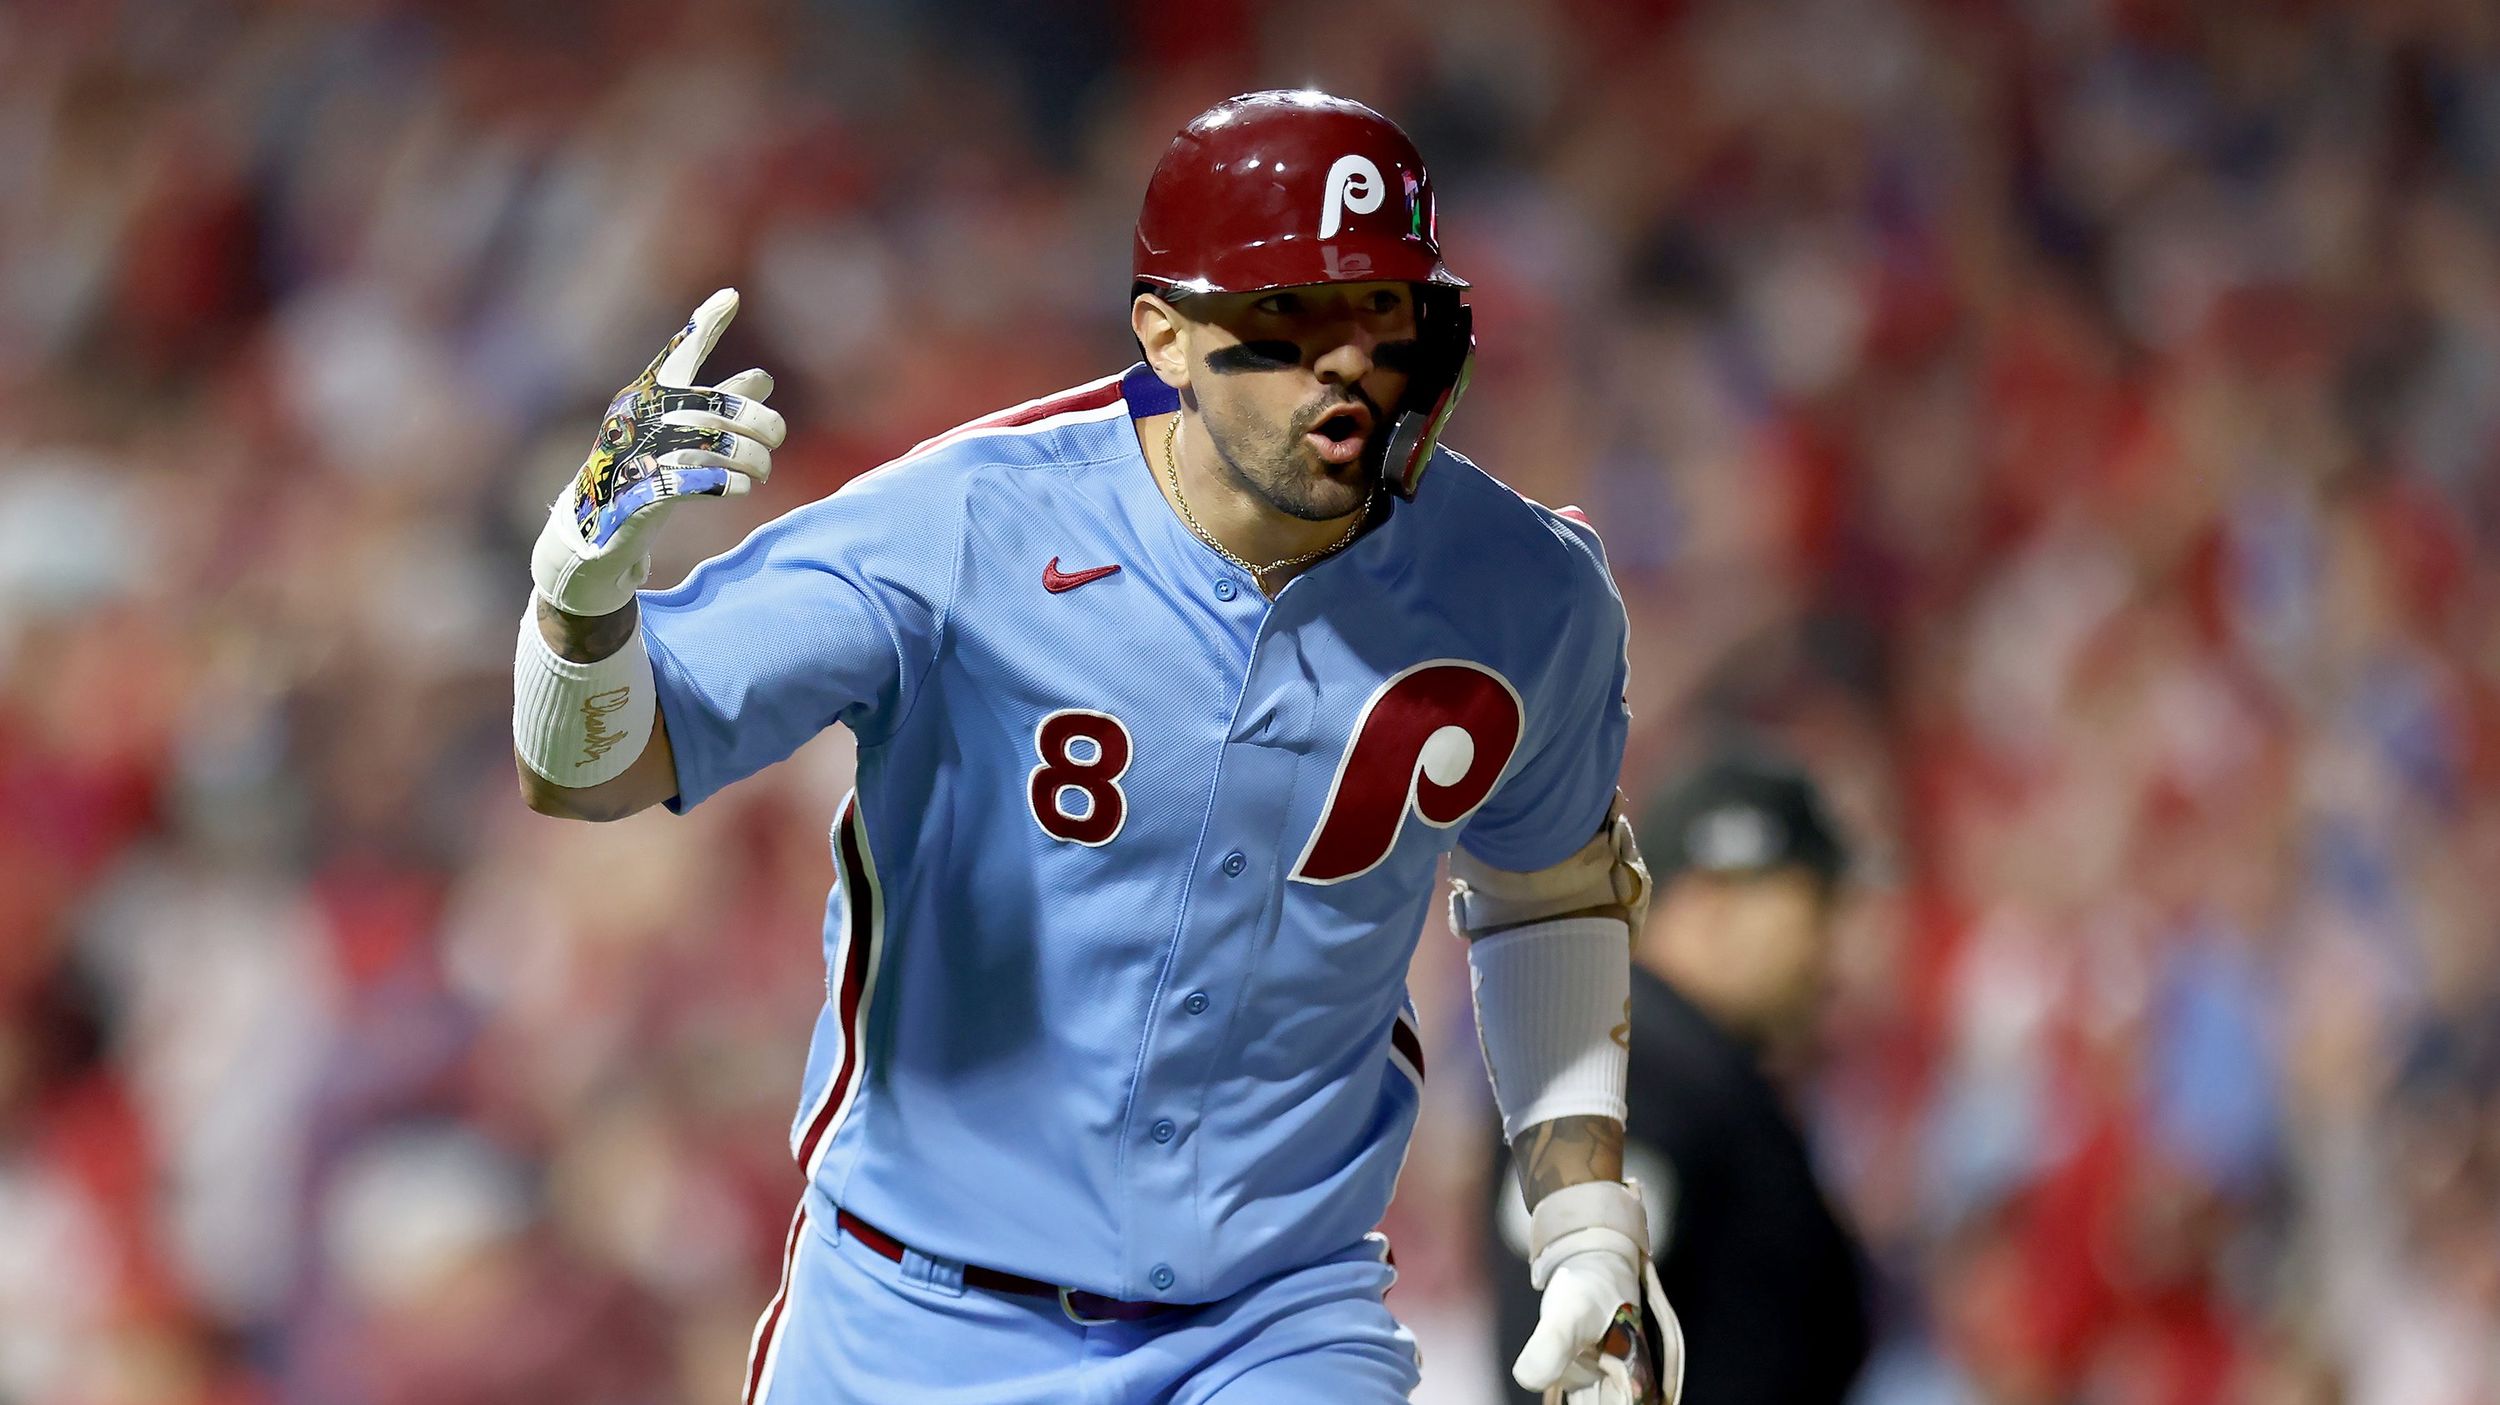 Nick Castellanos leads star turns in powering the Phillies past the Braves  and back to the NLCS